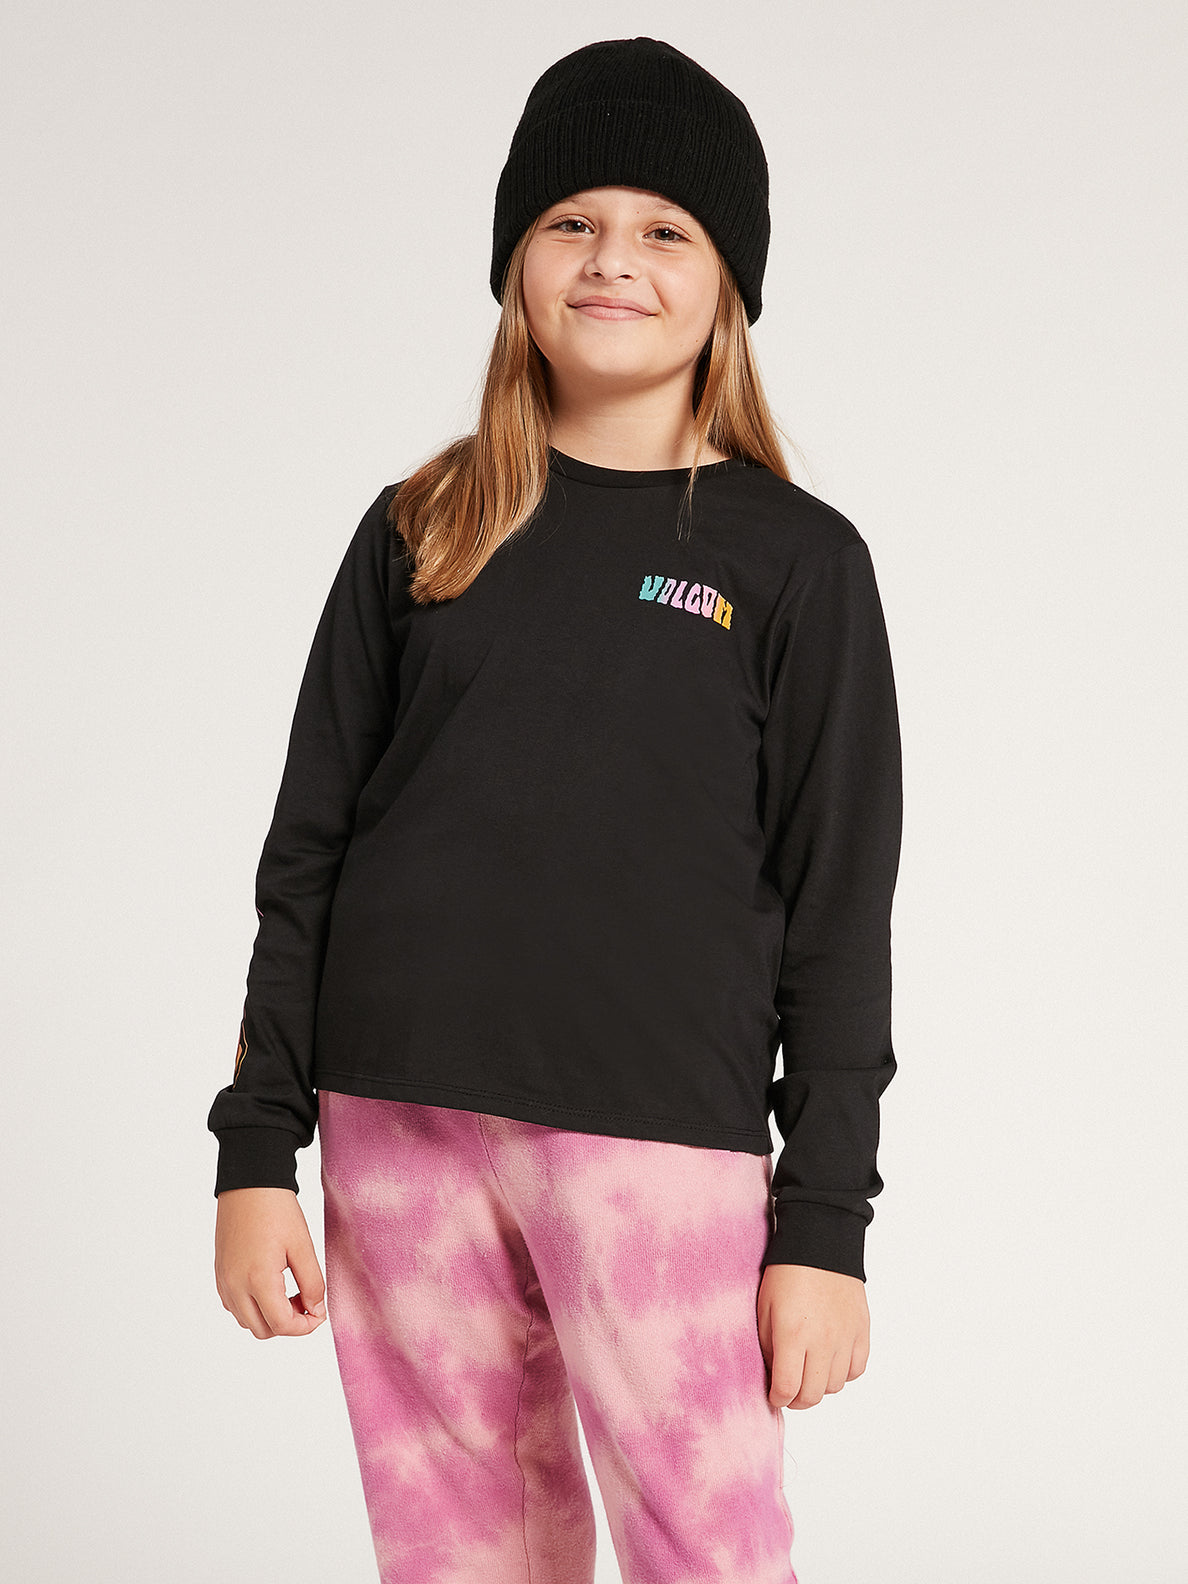 Girls Made From Stoke Long Sleeve Tee - Black (R3632100_BLK) [F]